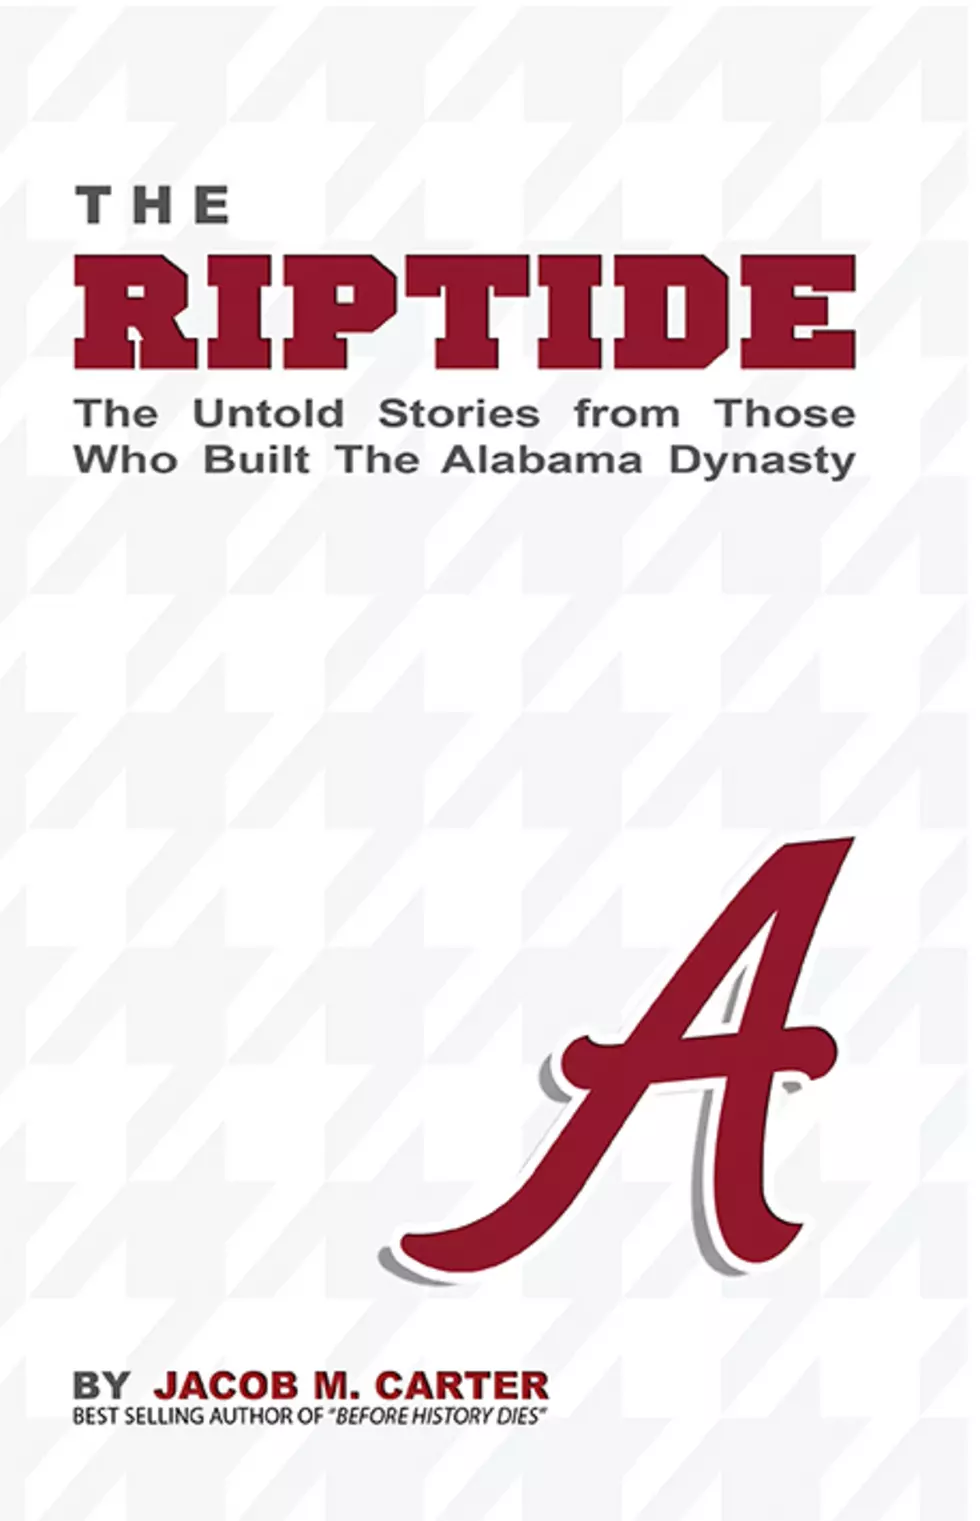 Author of &#8220;The RipTide&#8221; to Appear on Morning Show